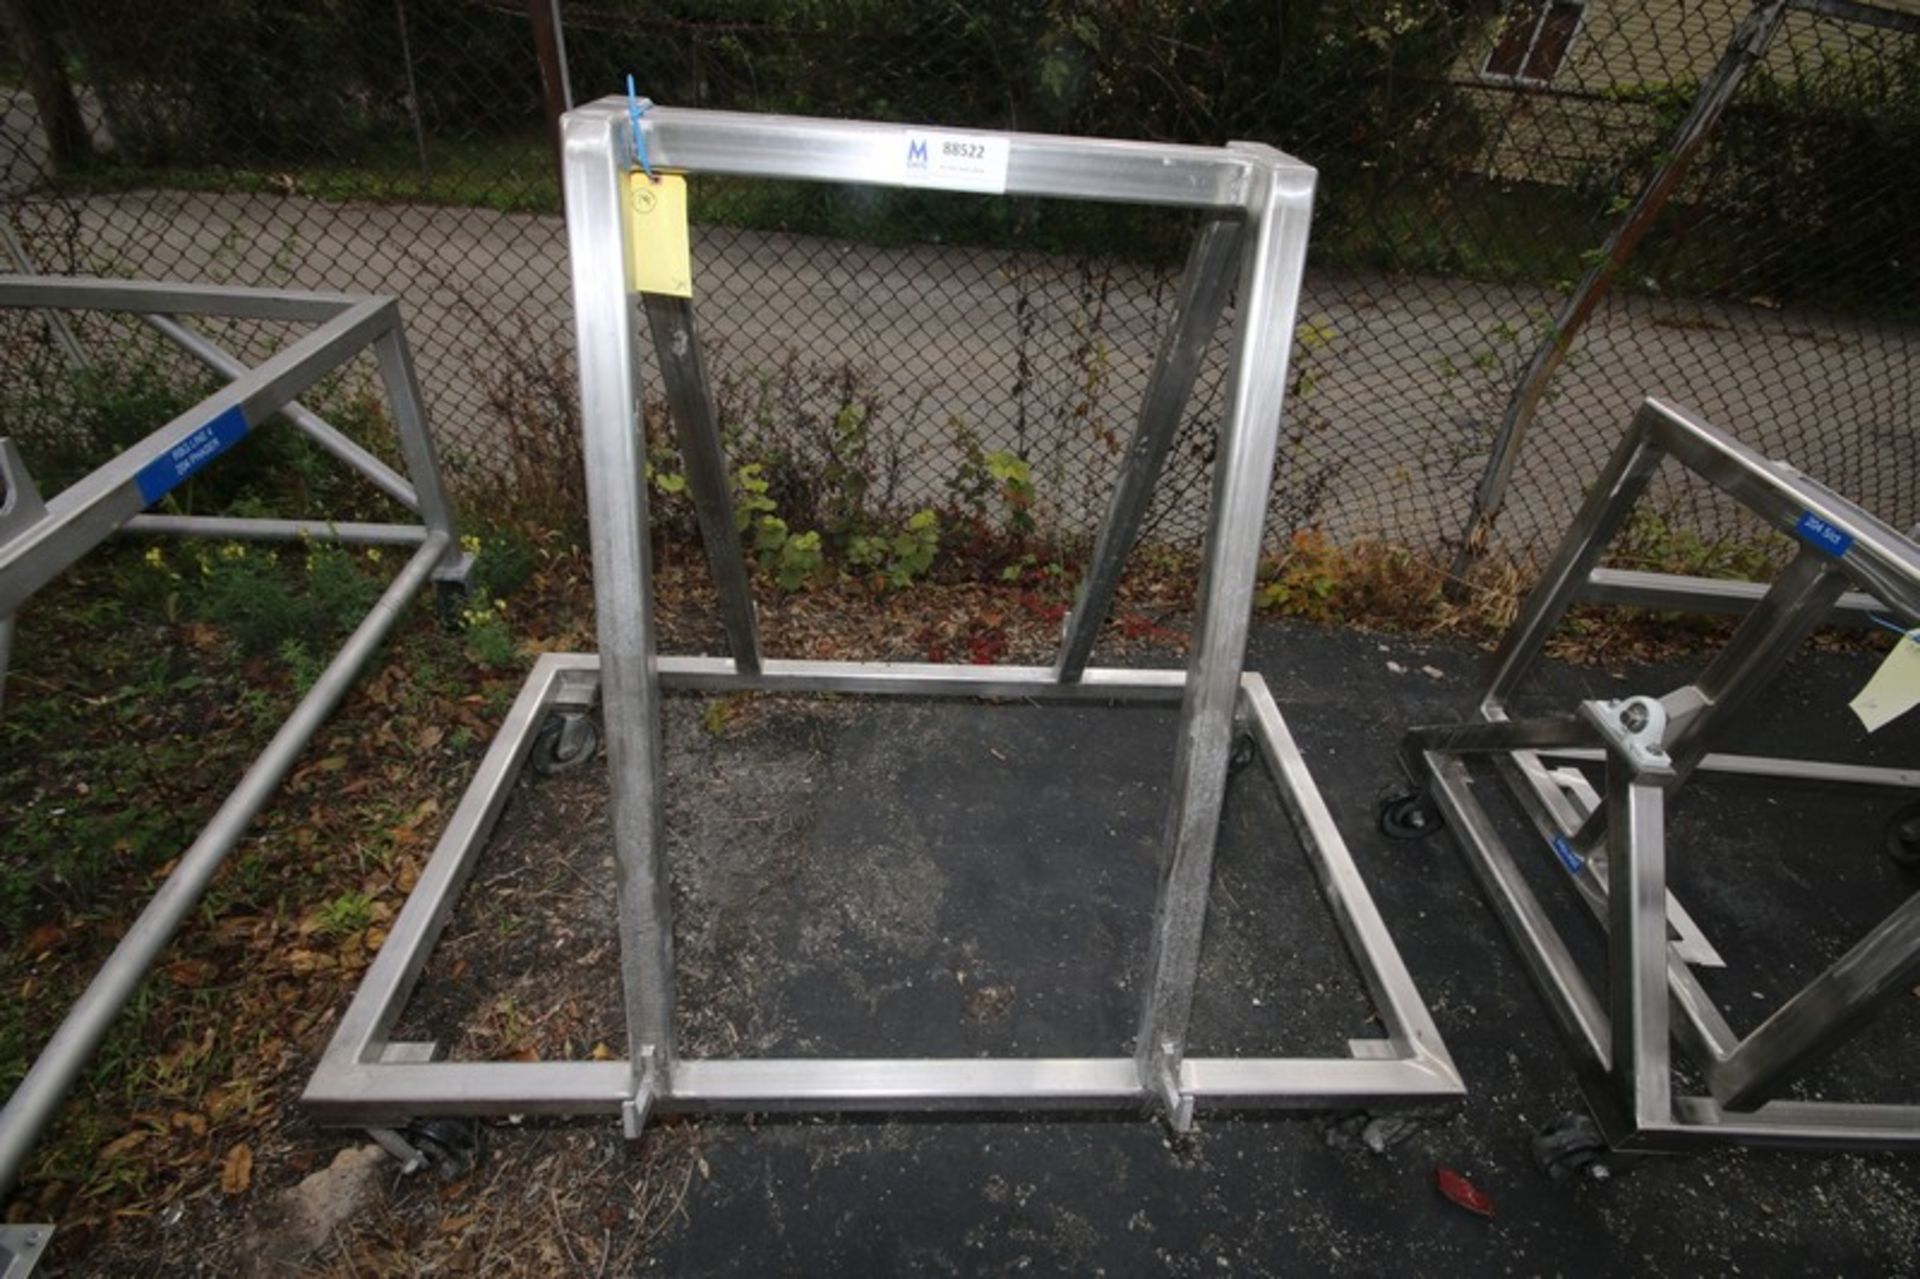 5' L x 3' W x 51" H, S/S Portable Rack(INV#88522)(Located @ the MDG Auction Showroom in Pgh., PA)(